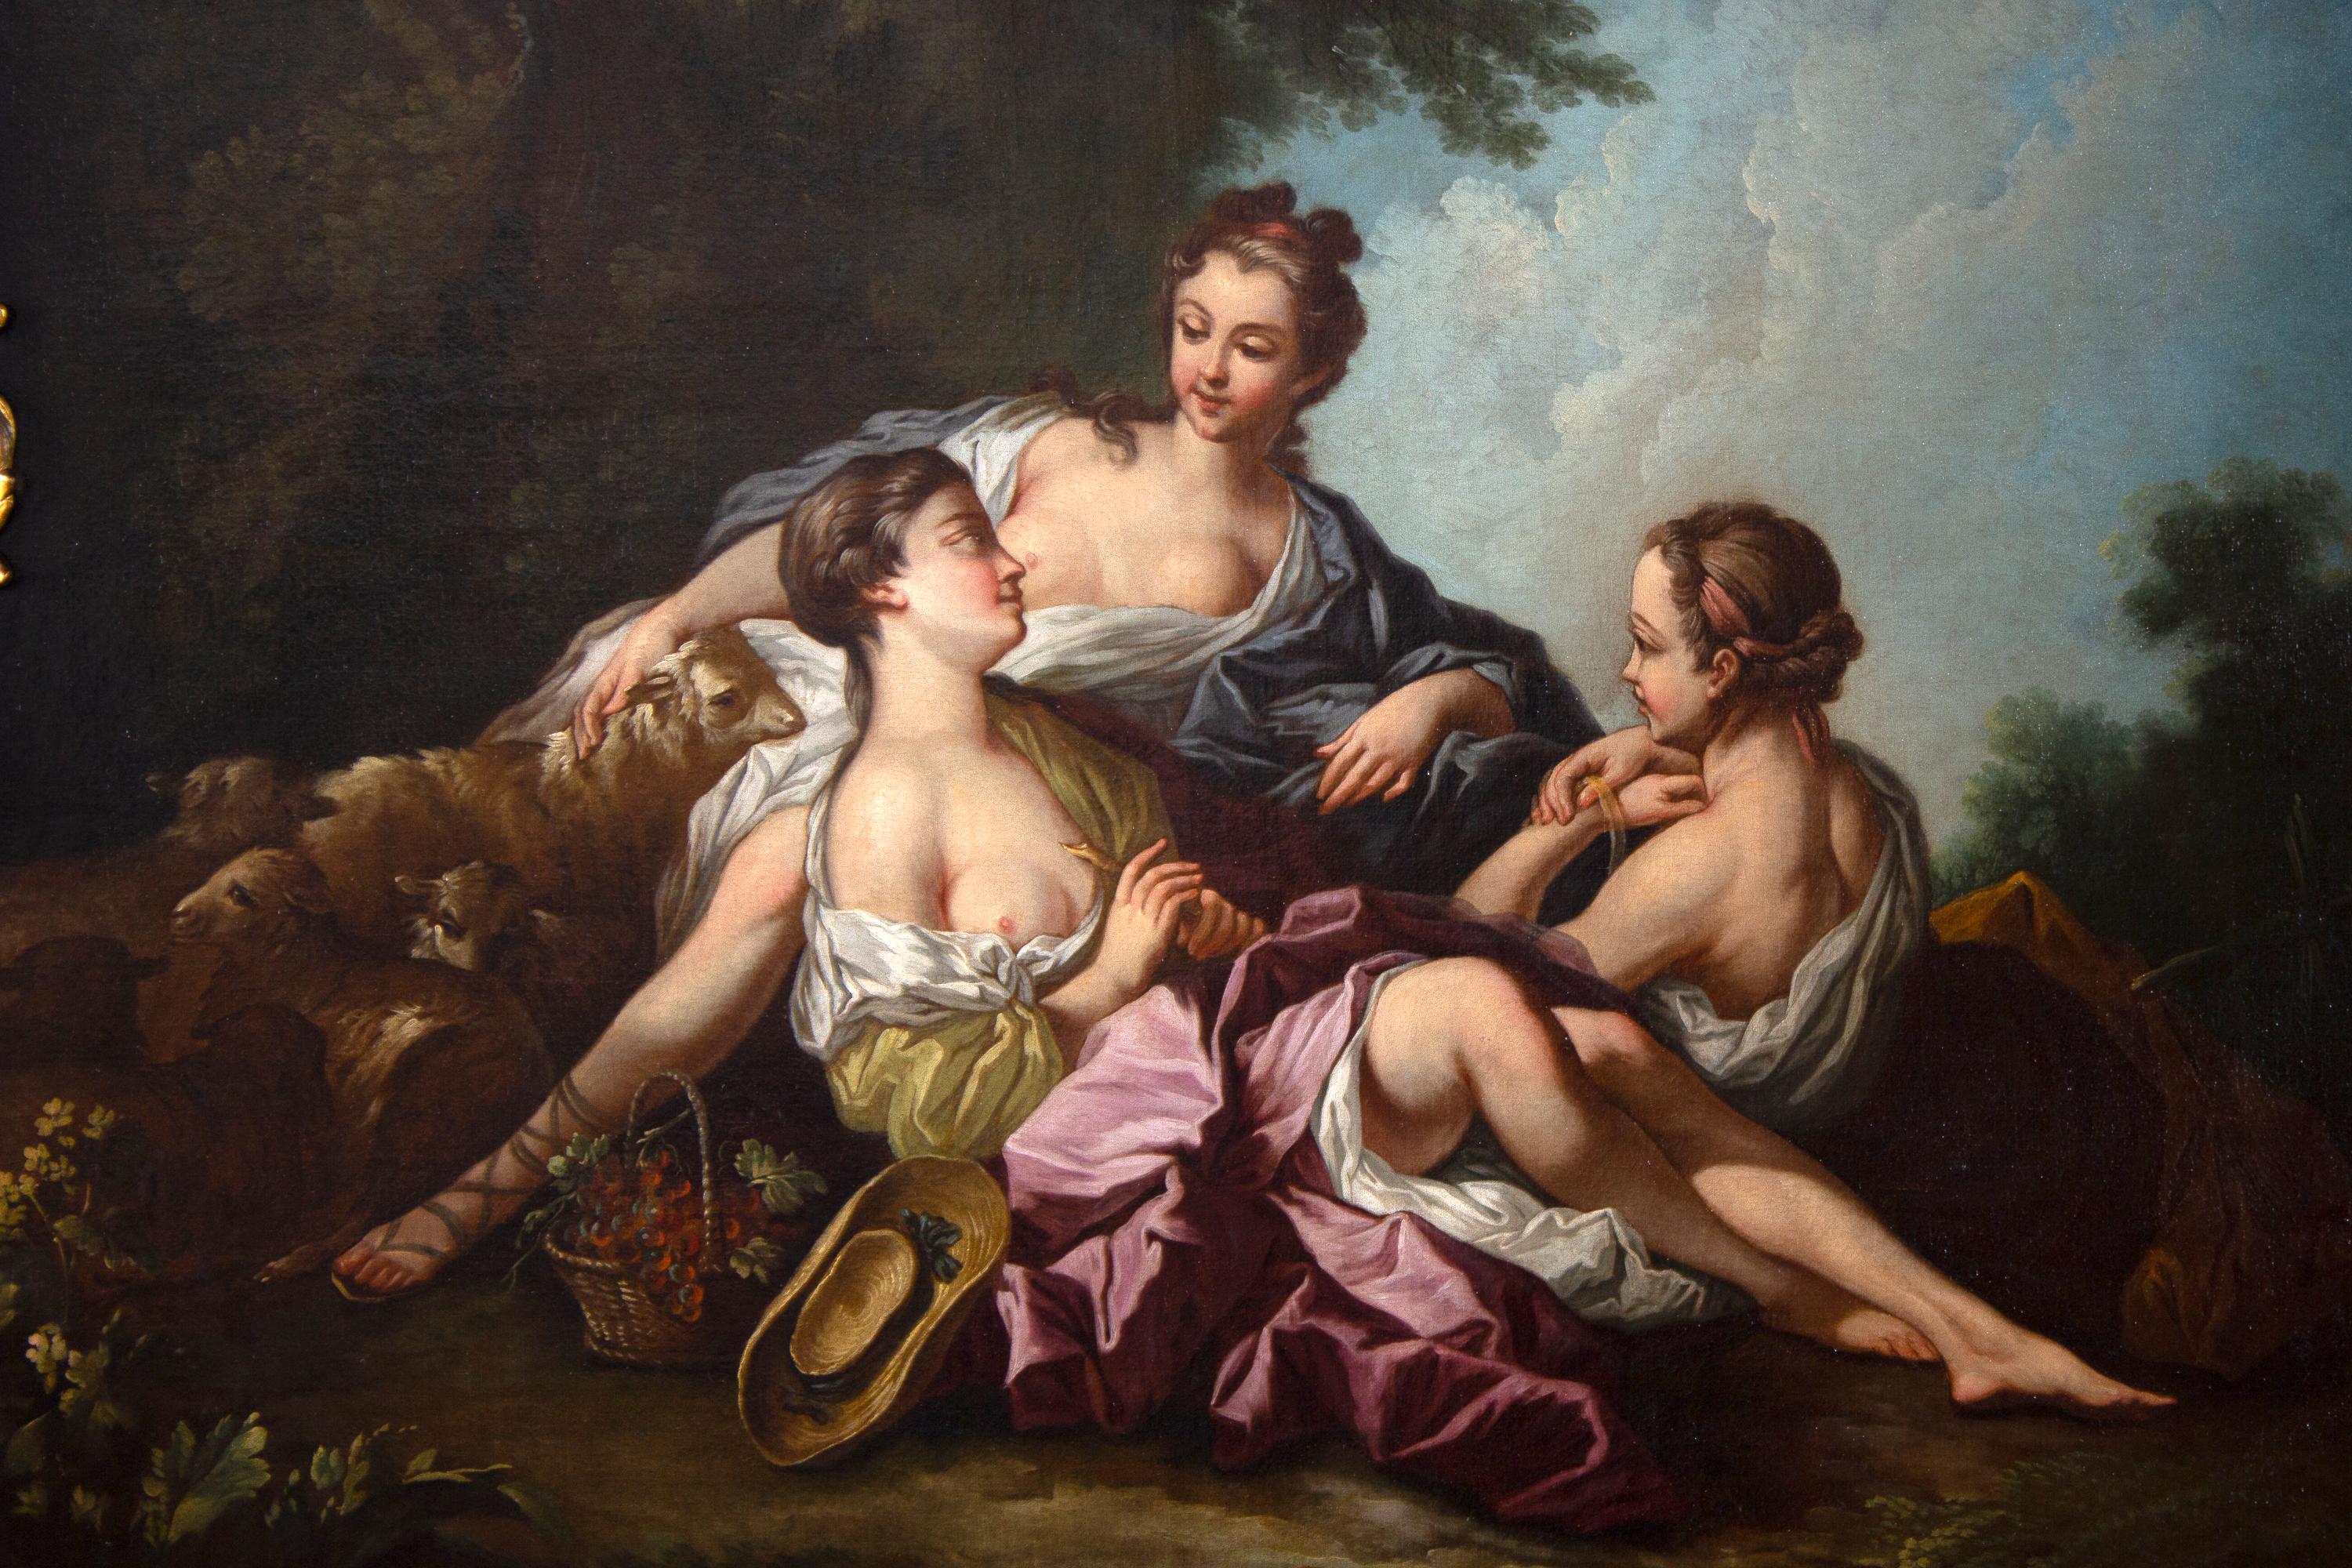  Amazing works of the genre scene,  dates to the late 18th century. After the famous  French artist Francois Boucher, who was the court painter to King Louis XV.
It is in its original finely carved and gilded wood frame and painted in oil on canvas.